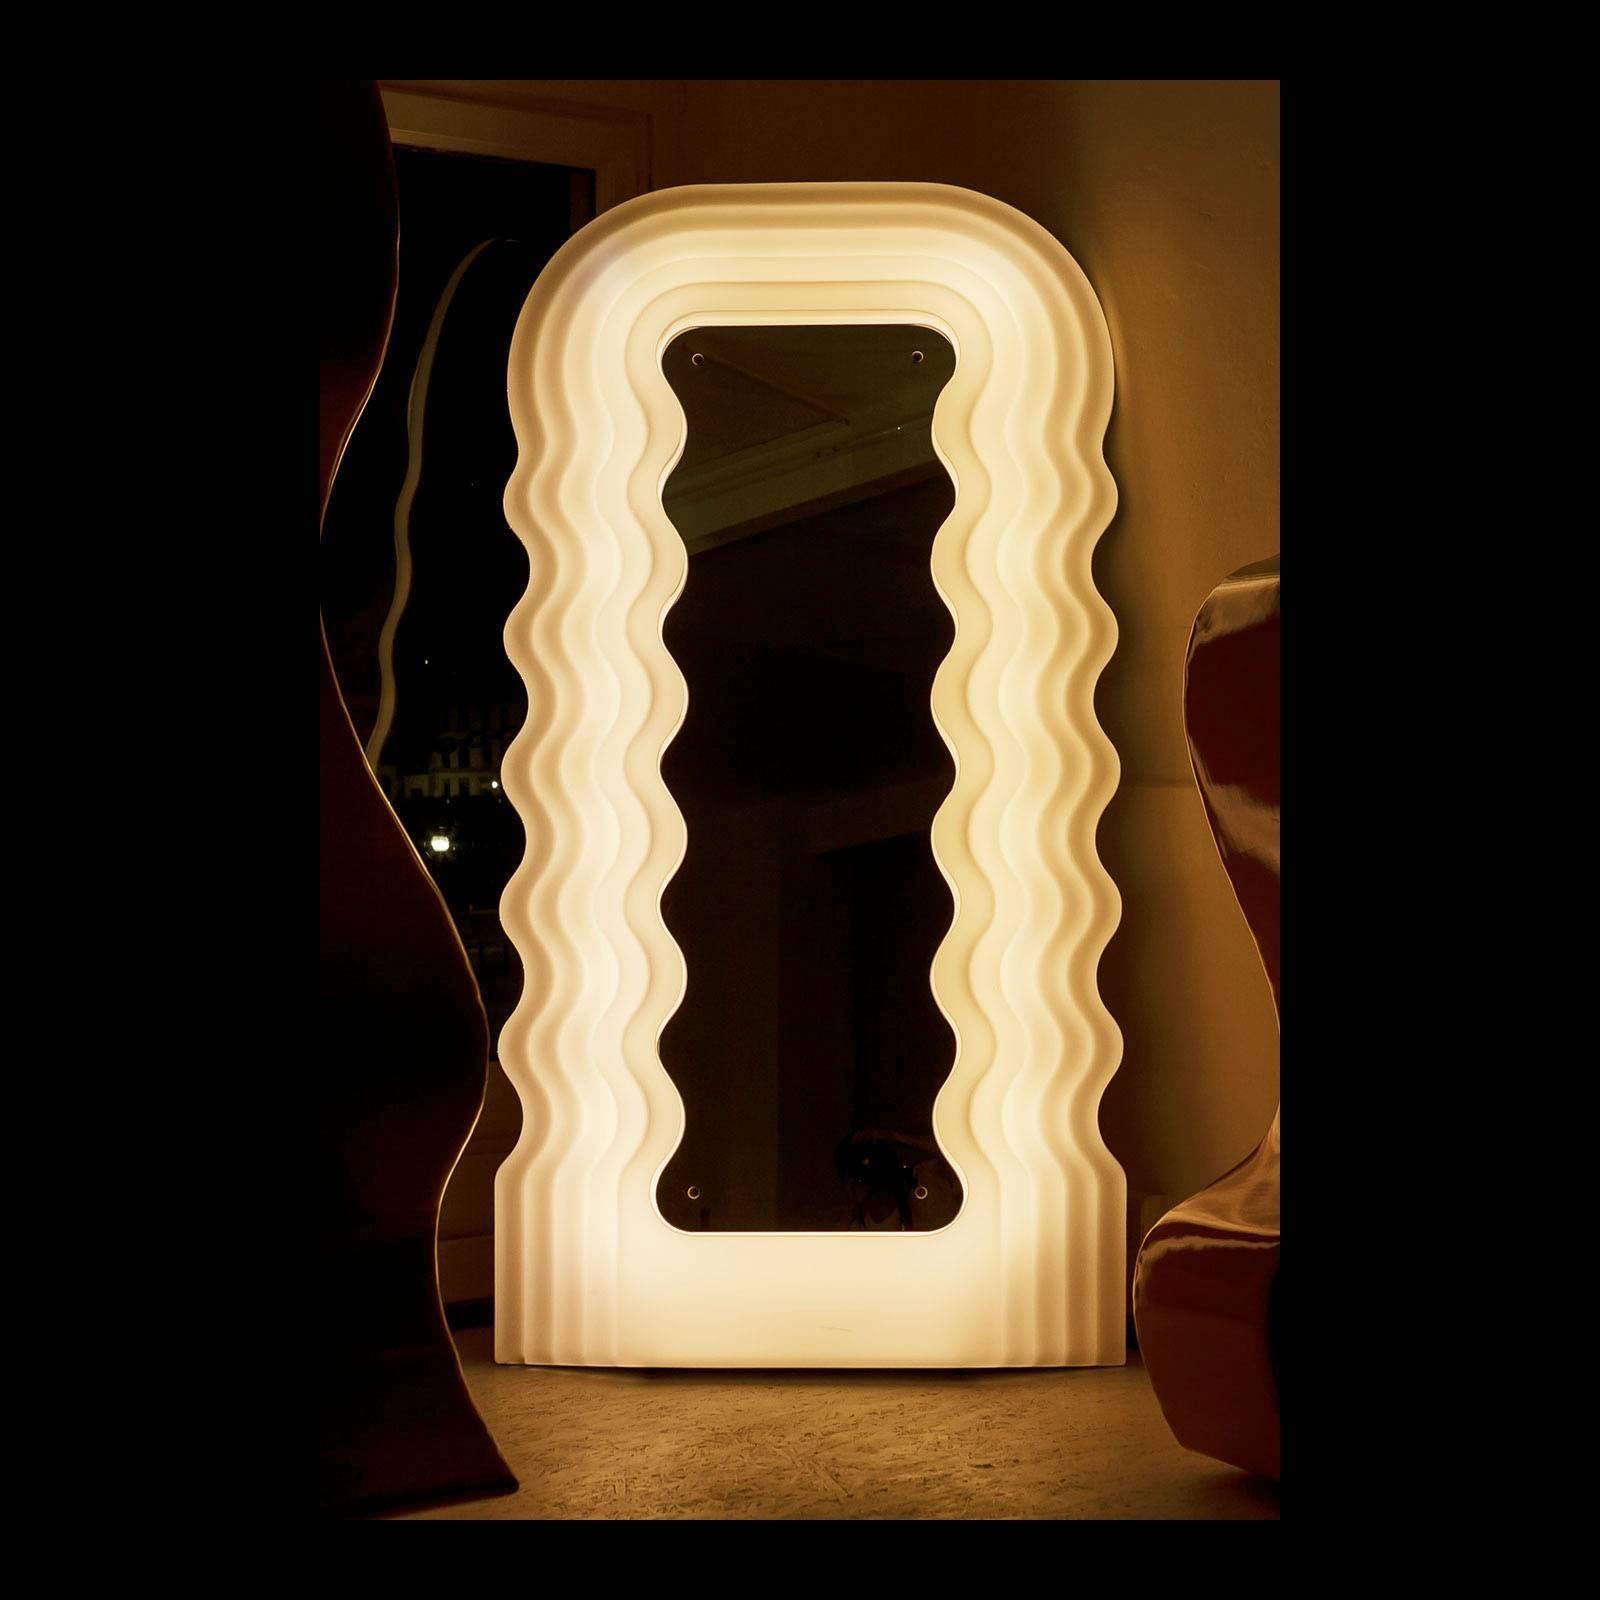 1970s Mid-Century Modern mirror wall Ultrafragola by Ettore Sottsass
Measures cm: H 195, W 100, D 13

The original piece was produced in the 1970s by Poltronova and the acrylic sheet with which it was produced has assumed a slight yellowish